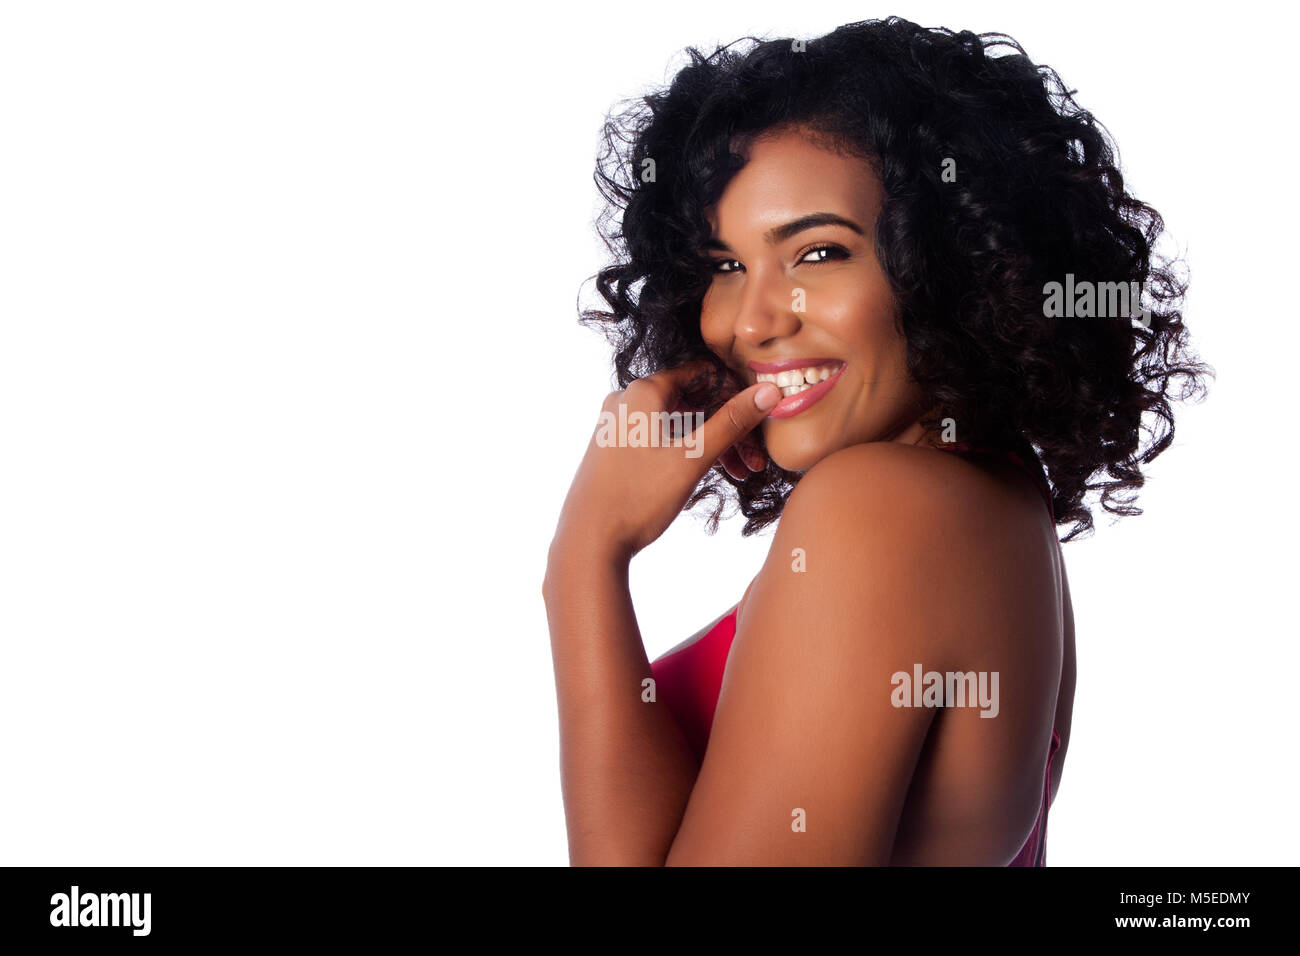 Beautiful face of smiling woman with curly hair on white. Stock Photo